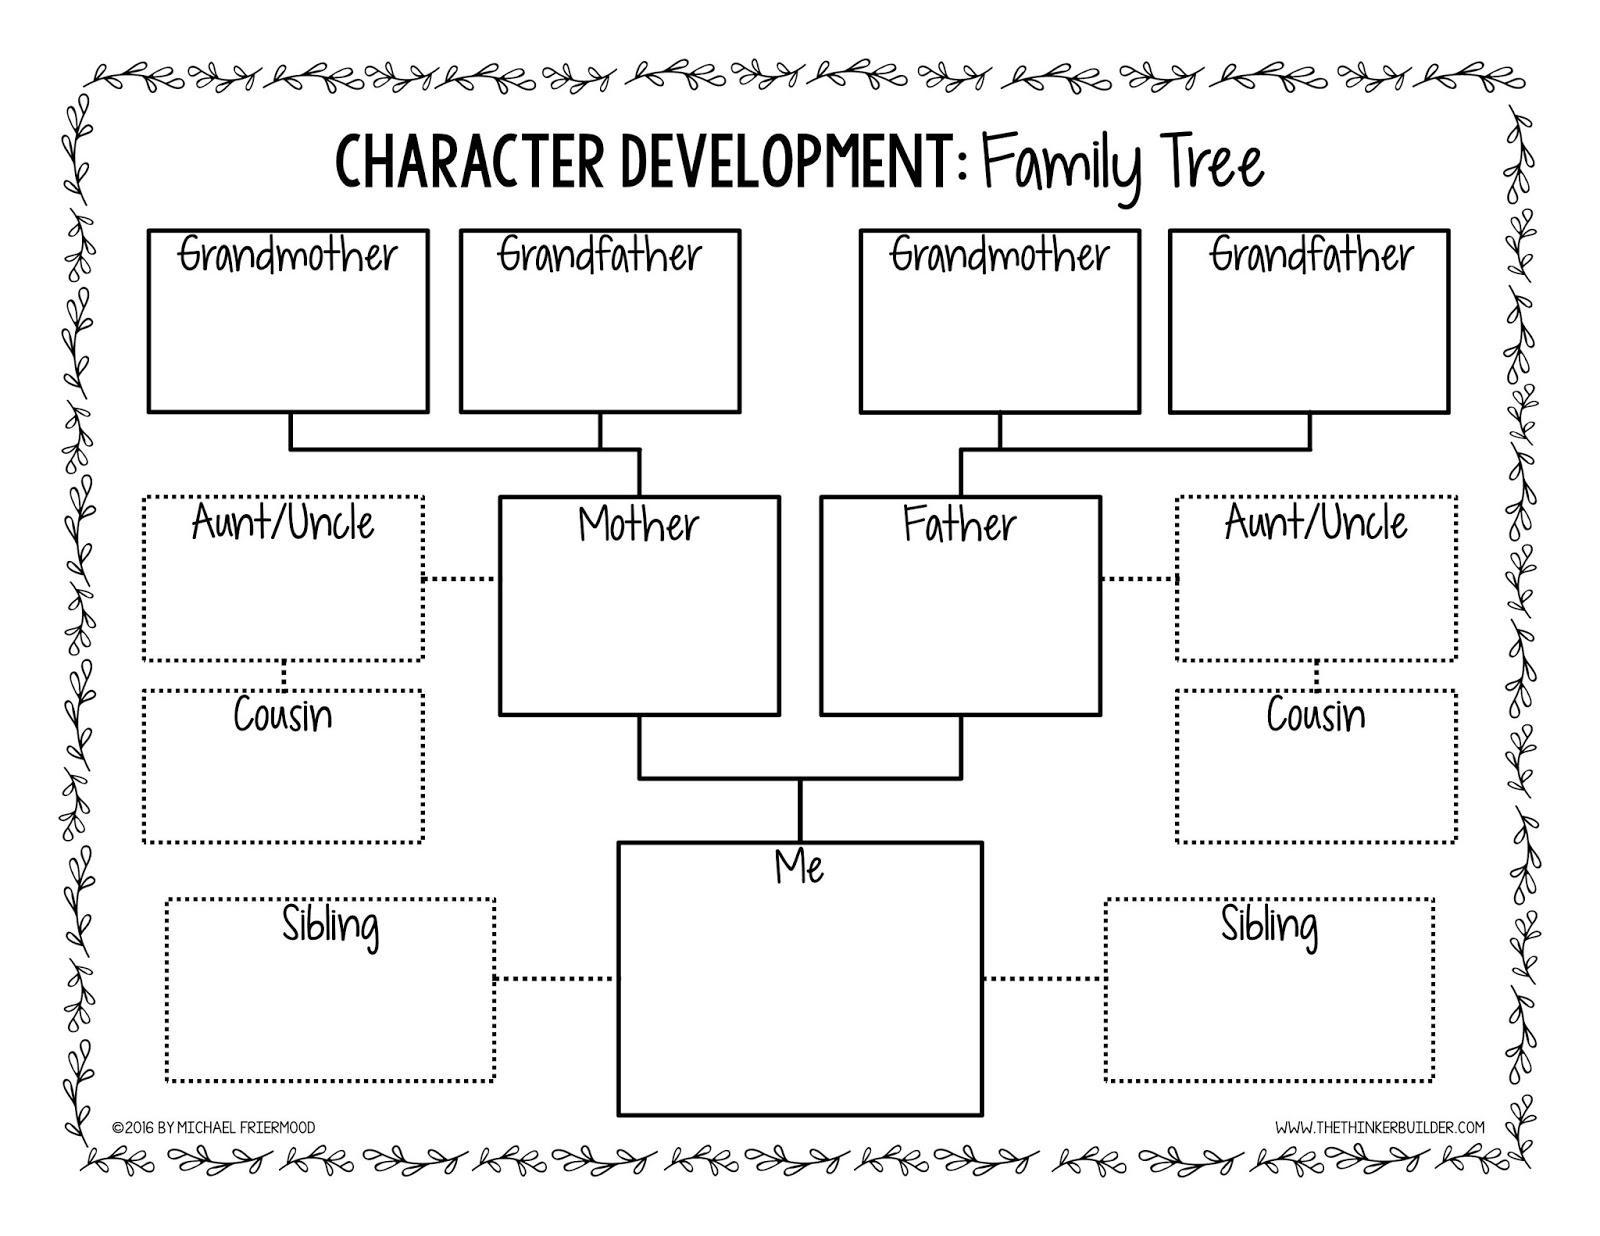 Design Your Own Character Worksheet